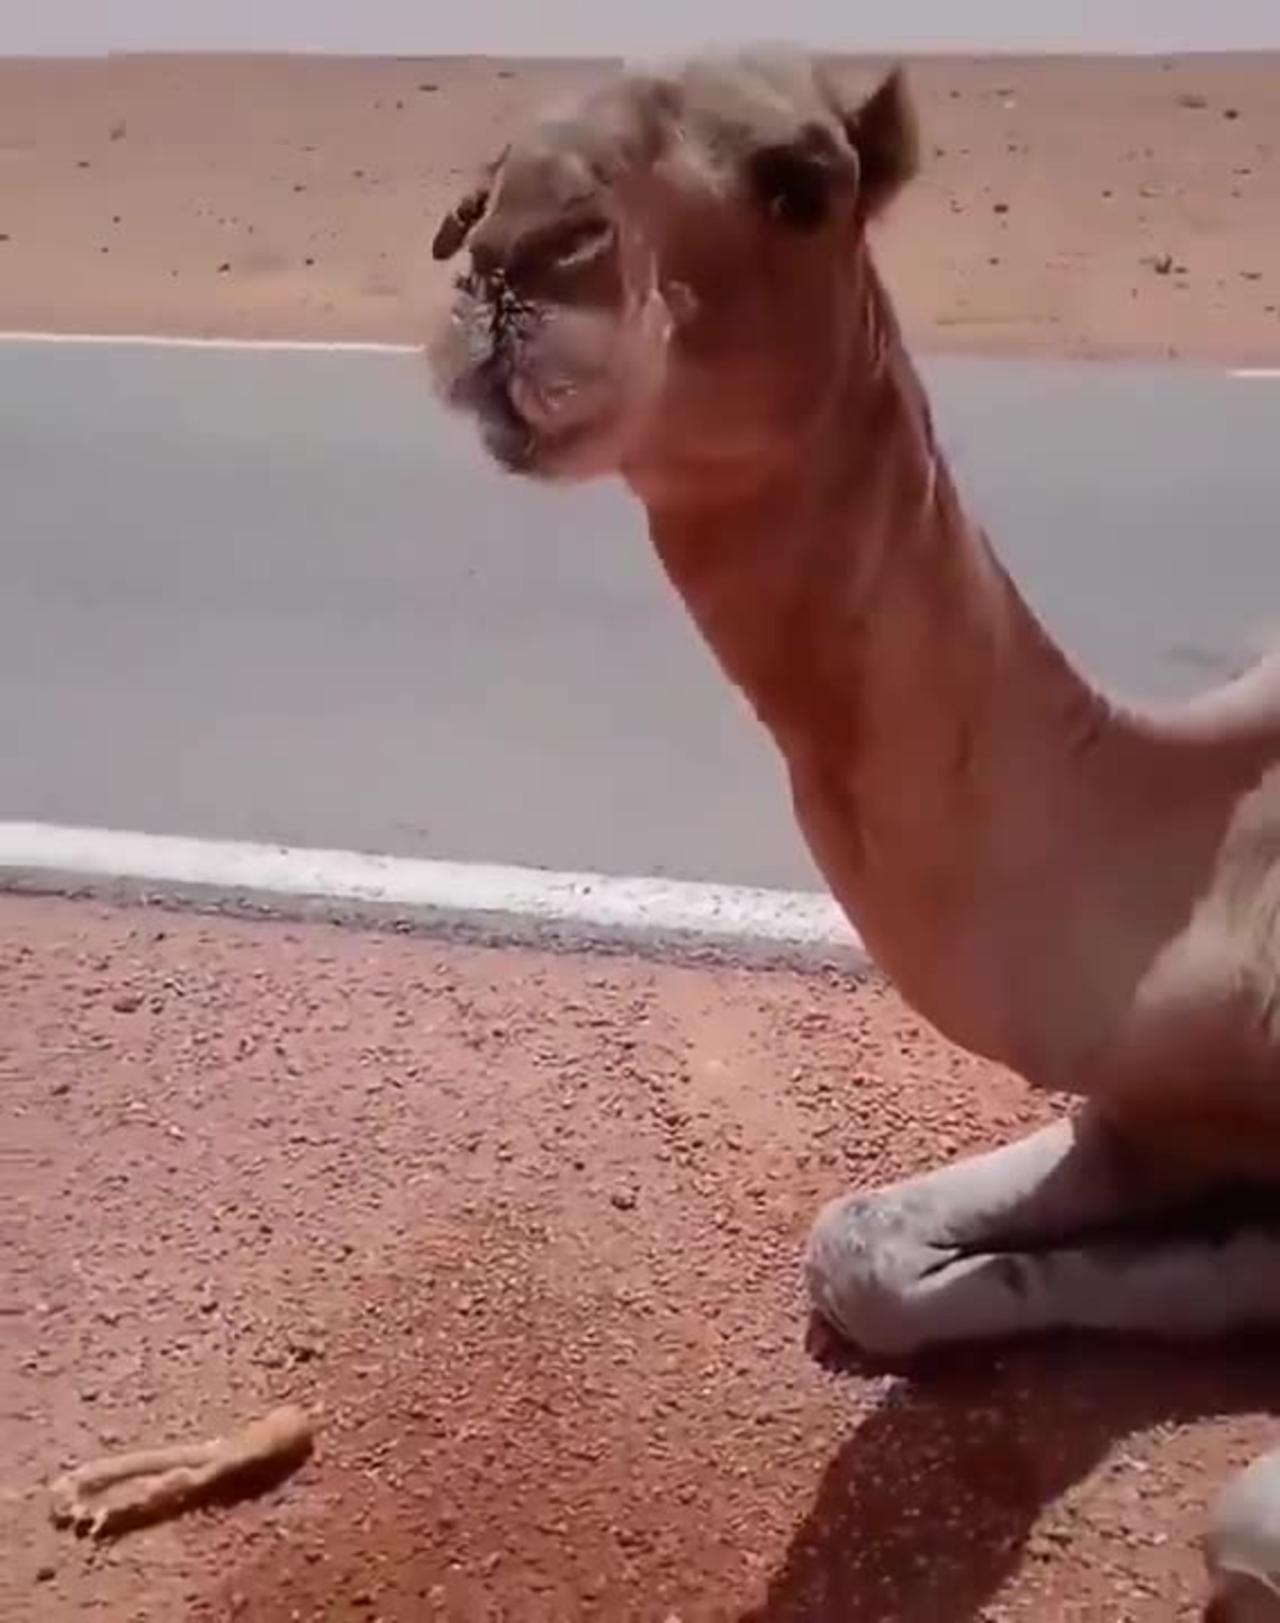 Truck driver provides water to thirsty camel in the middle of desert